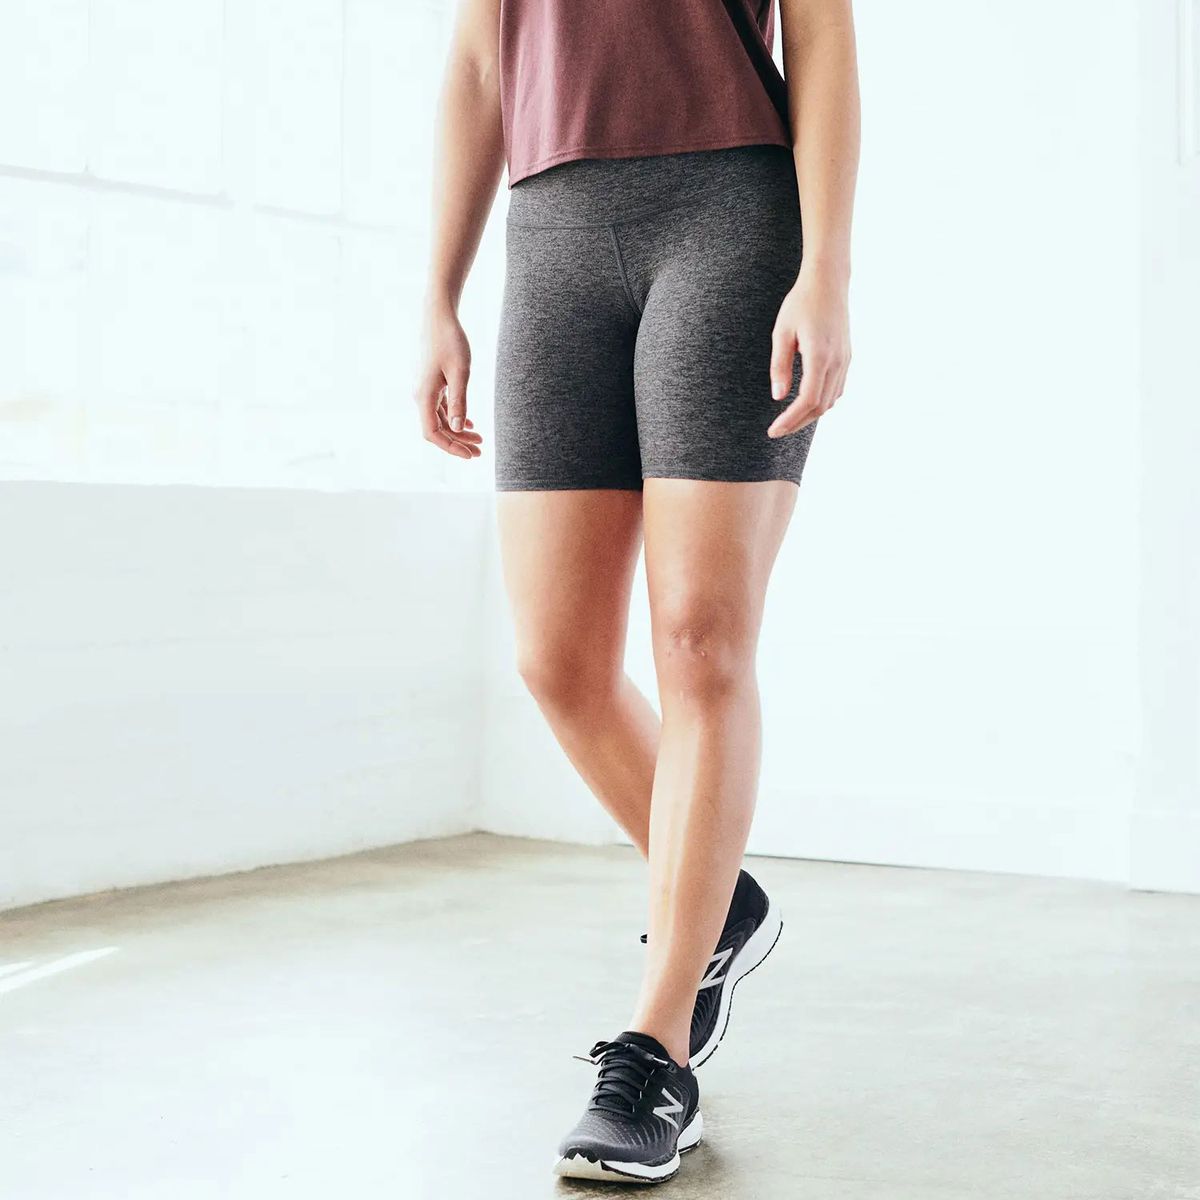 Flowknit Ultra-Soft Performance Legging and Top